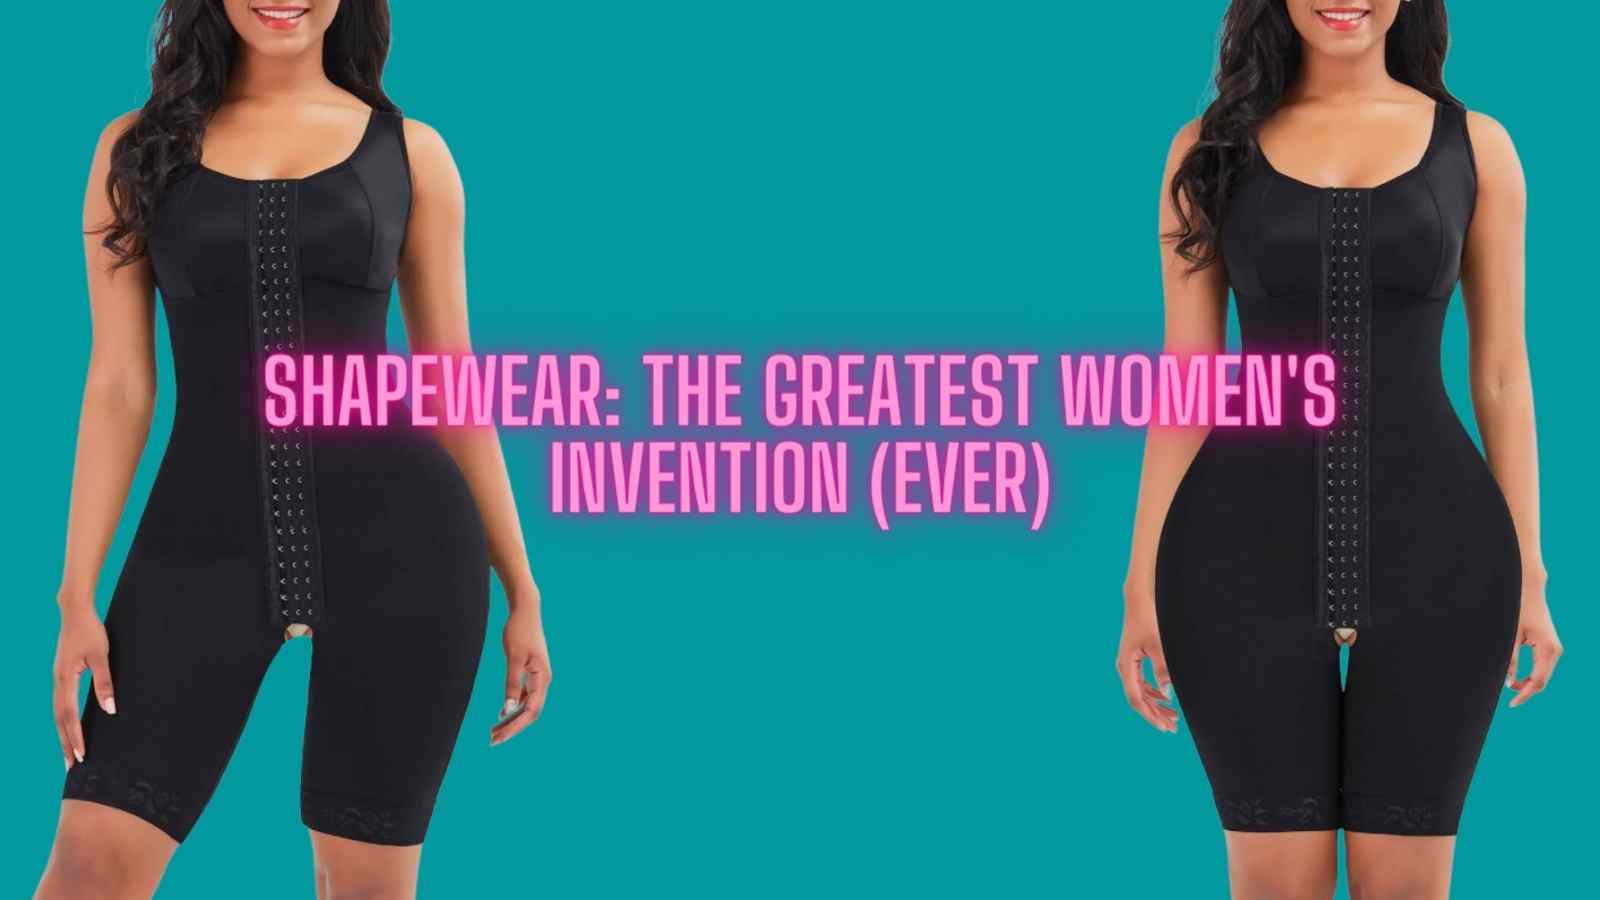 Shapewear: The Greatest Women's Invention (Ever)